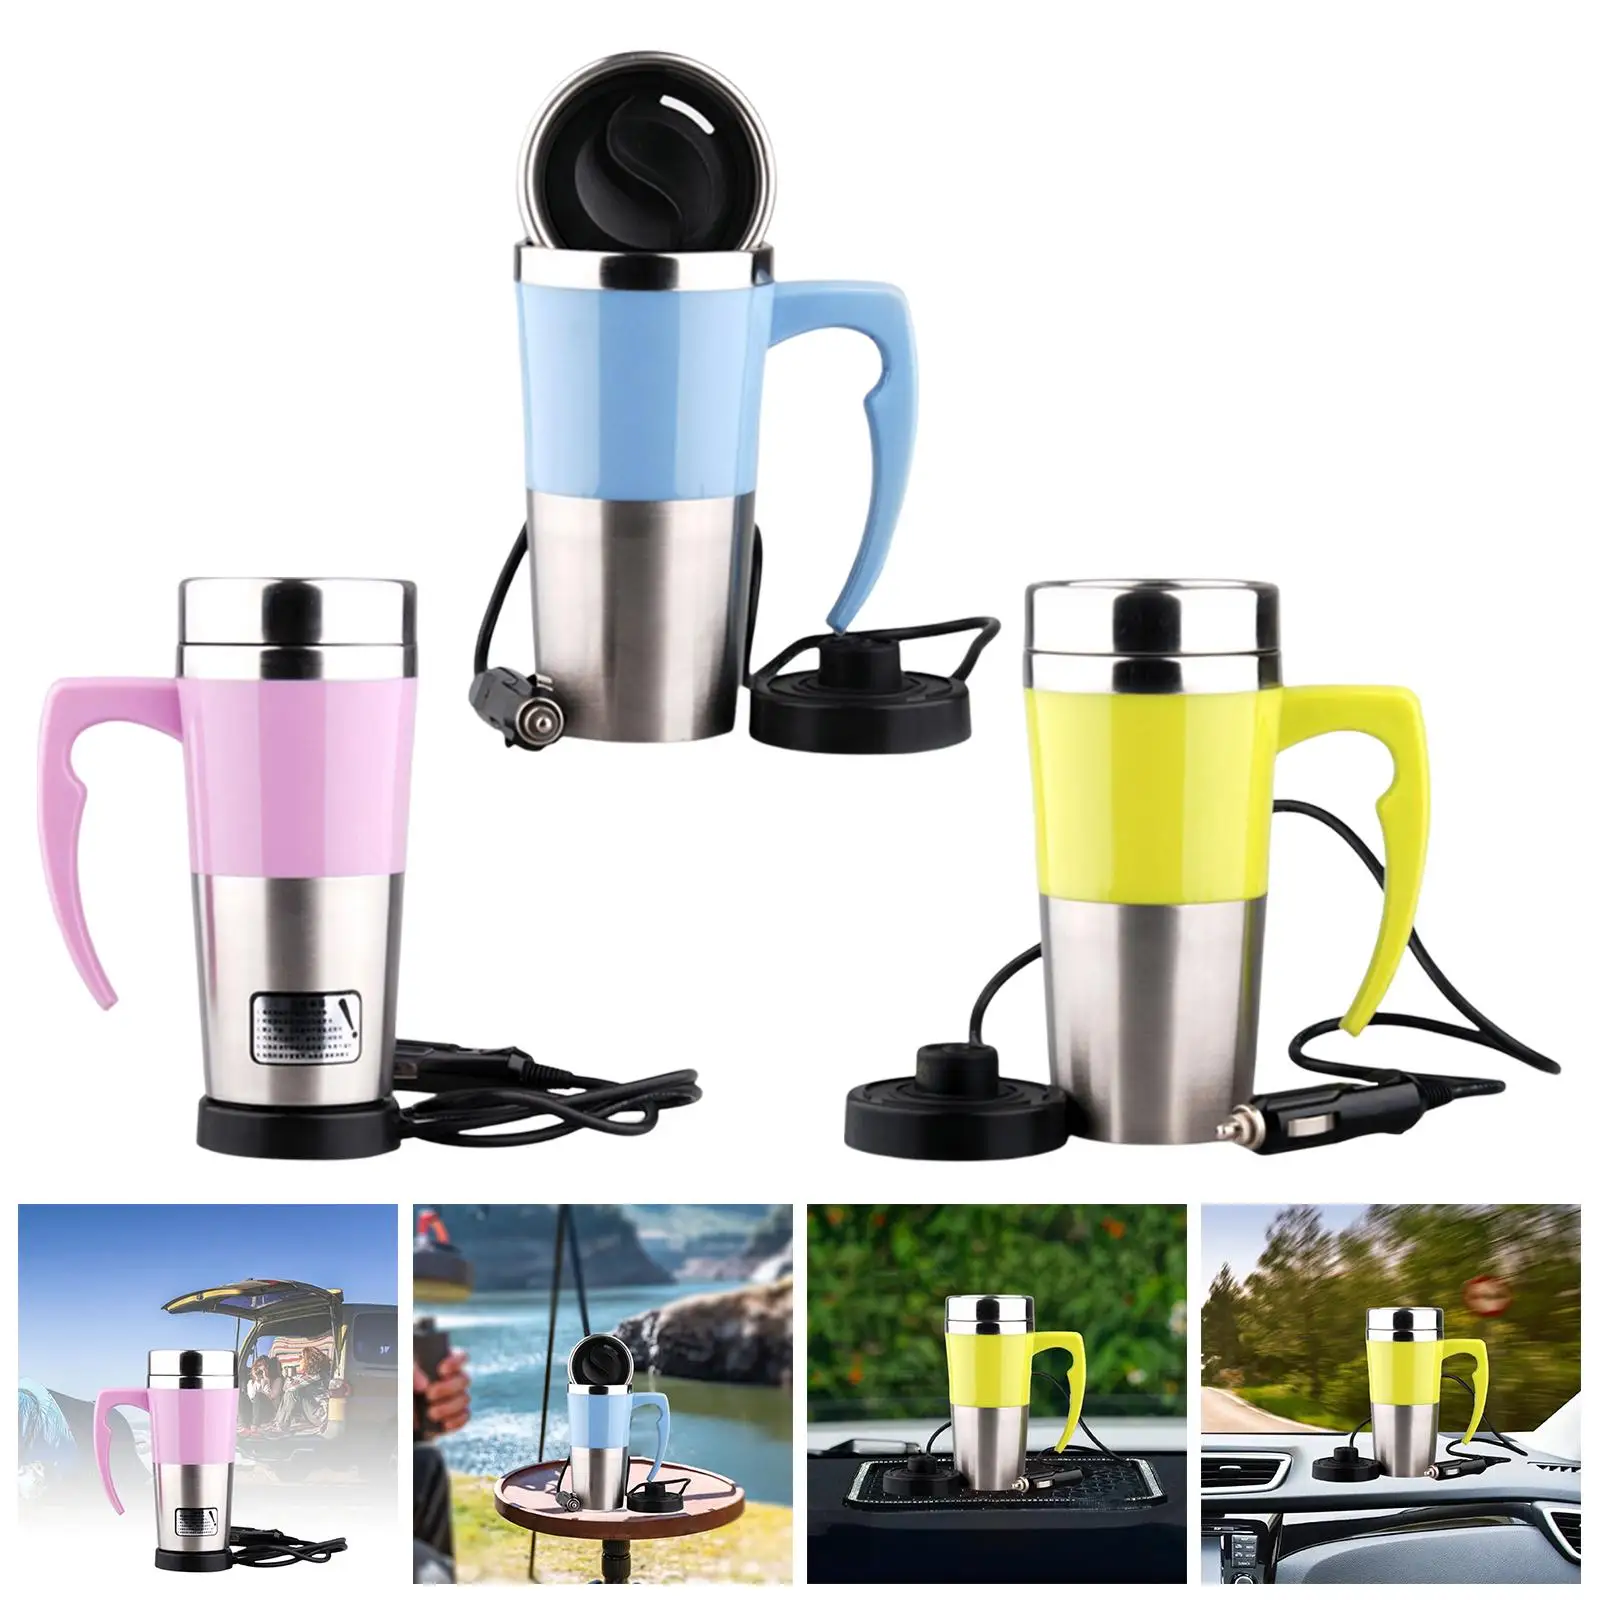 Car Electric Kettle 12V 350ml Electric In-Car Stainless Steel Portable Car Water Heater Mug Fit for Tea Hot Water Camping Boat